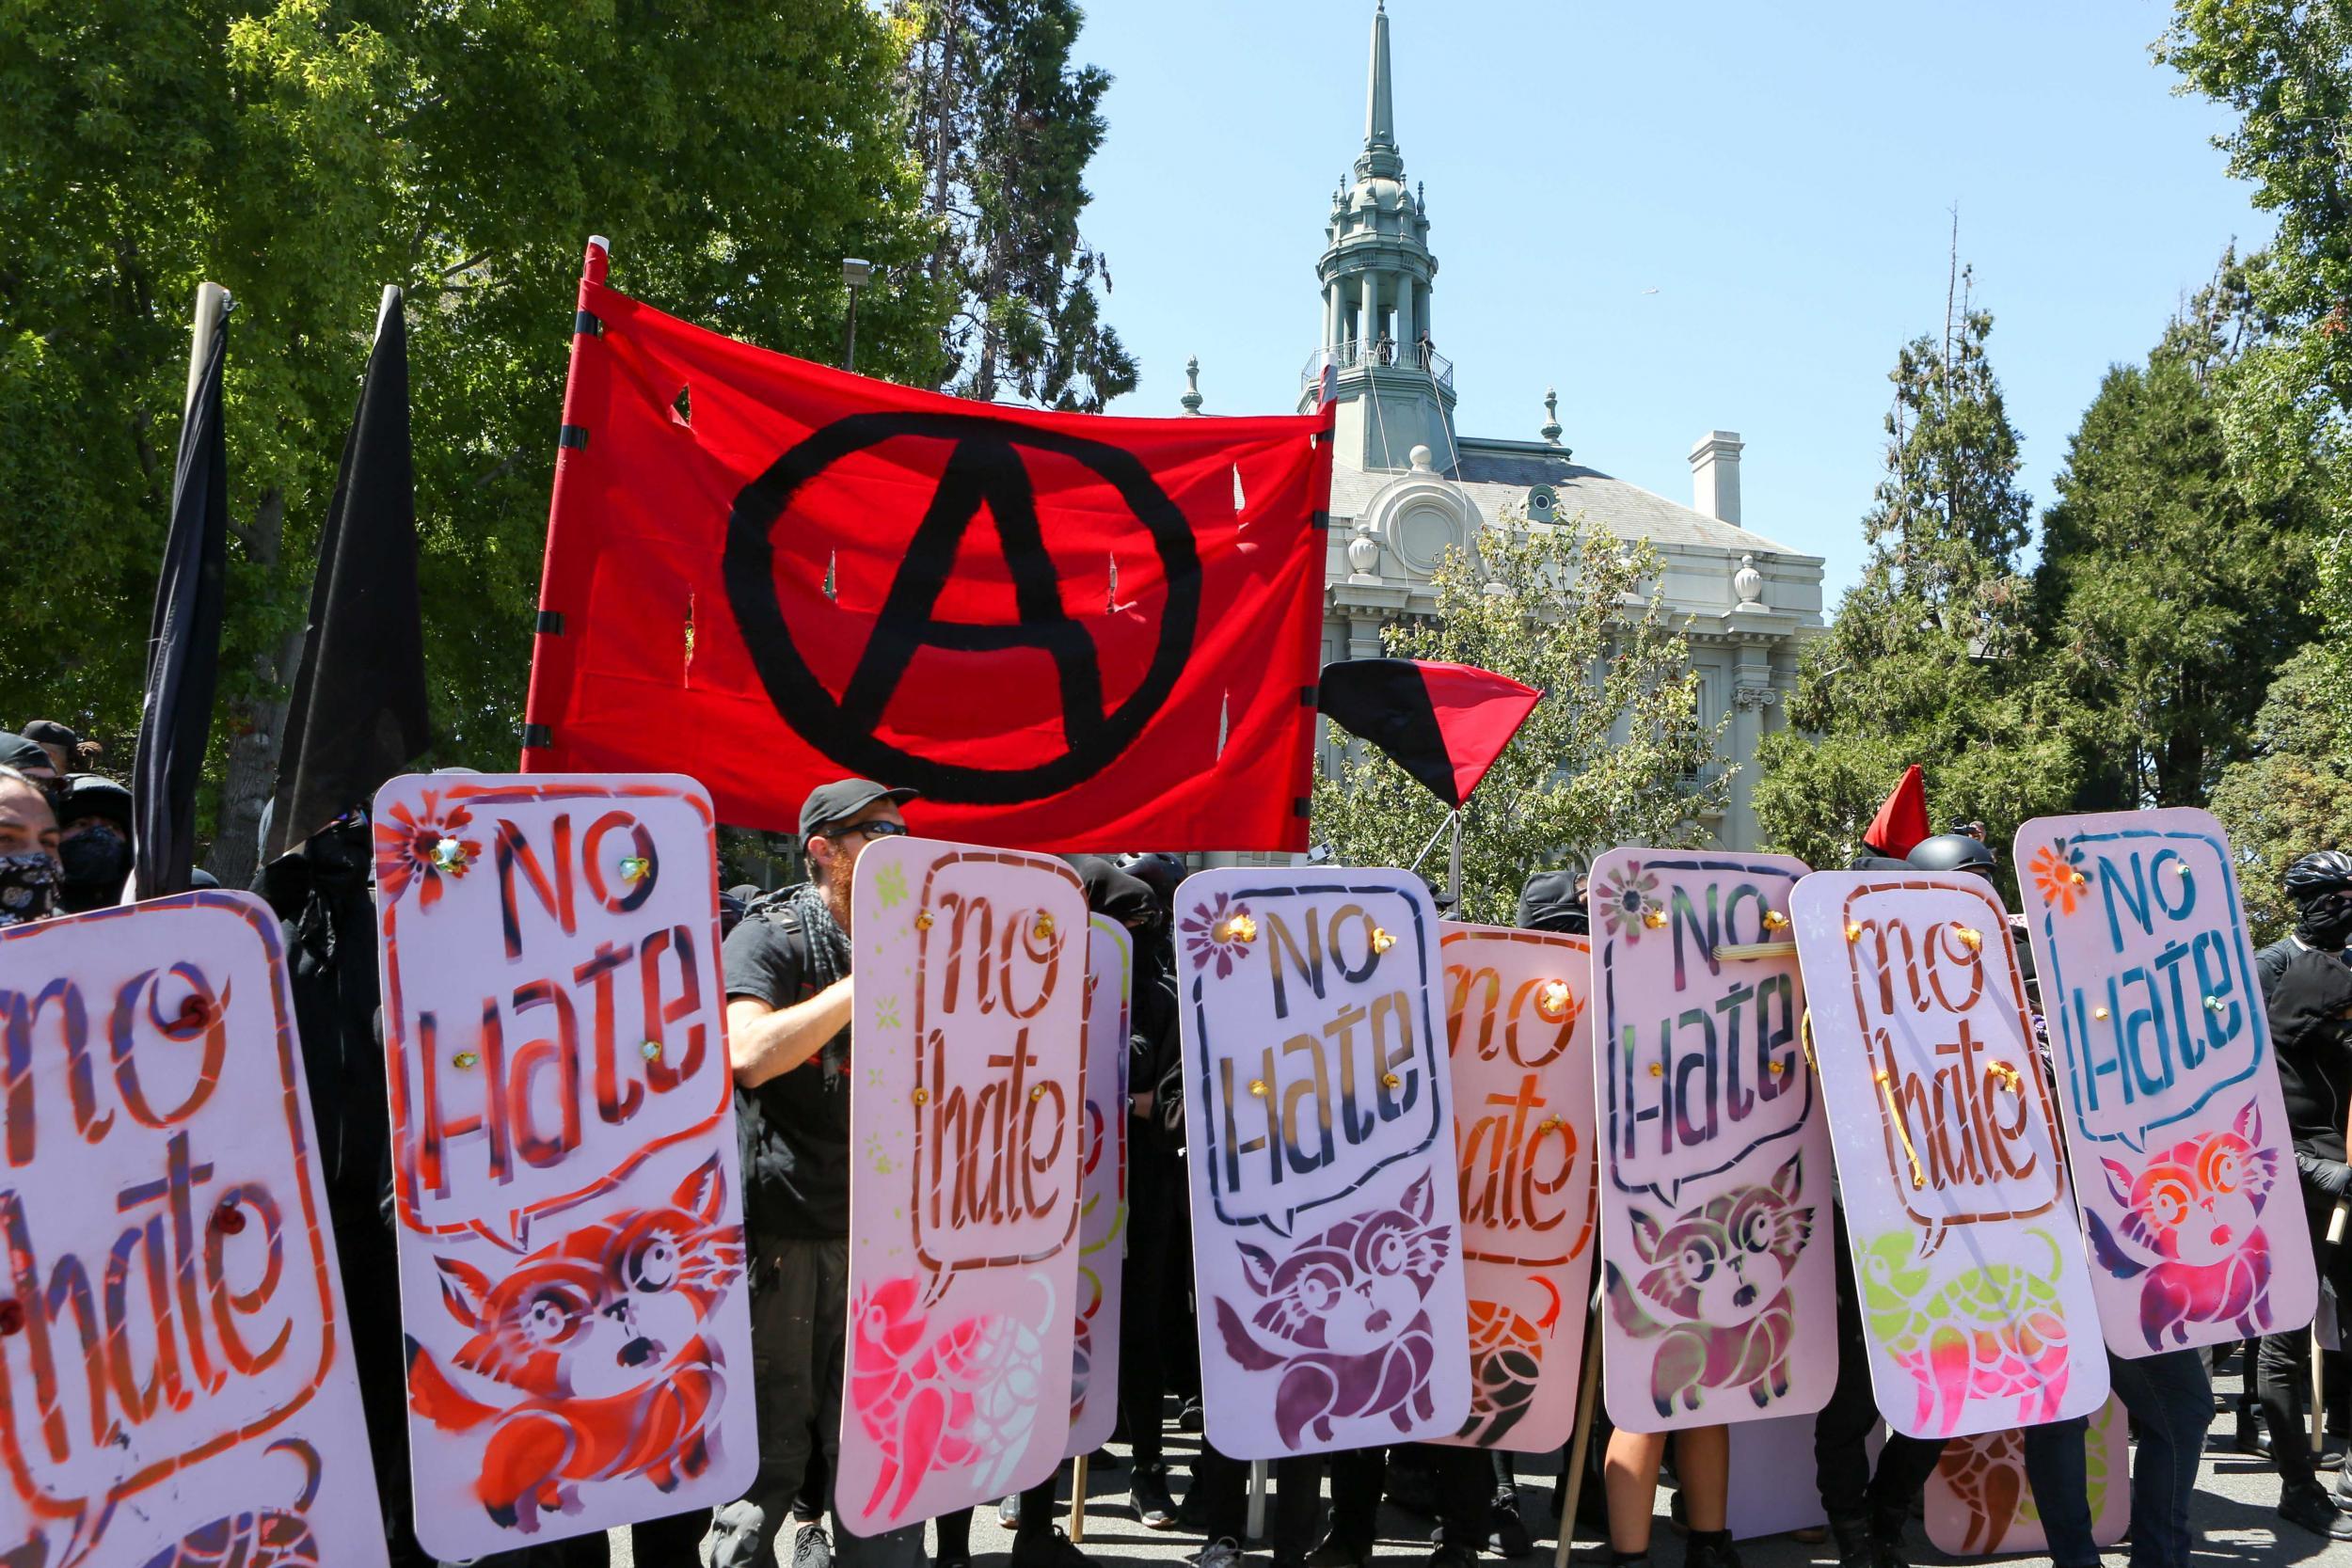 The anarchist flag flies over Antifa activists and counter protesters in Berkeley (AFP/Getty)